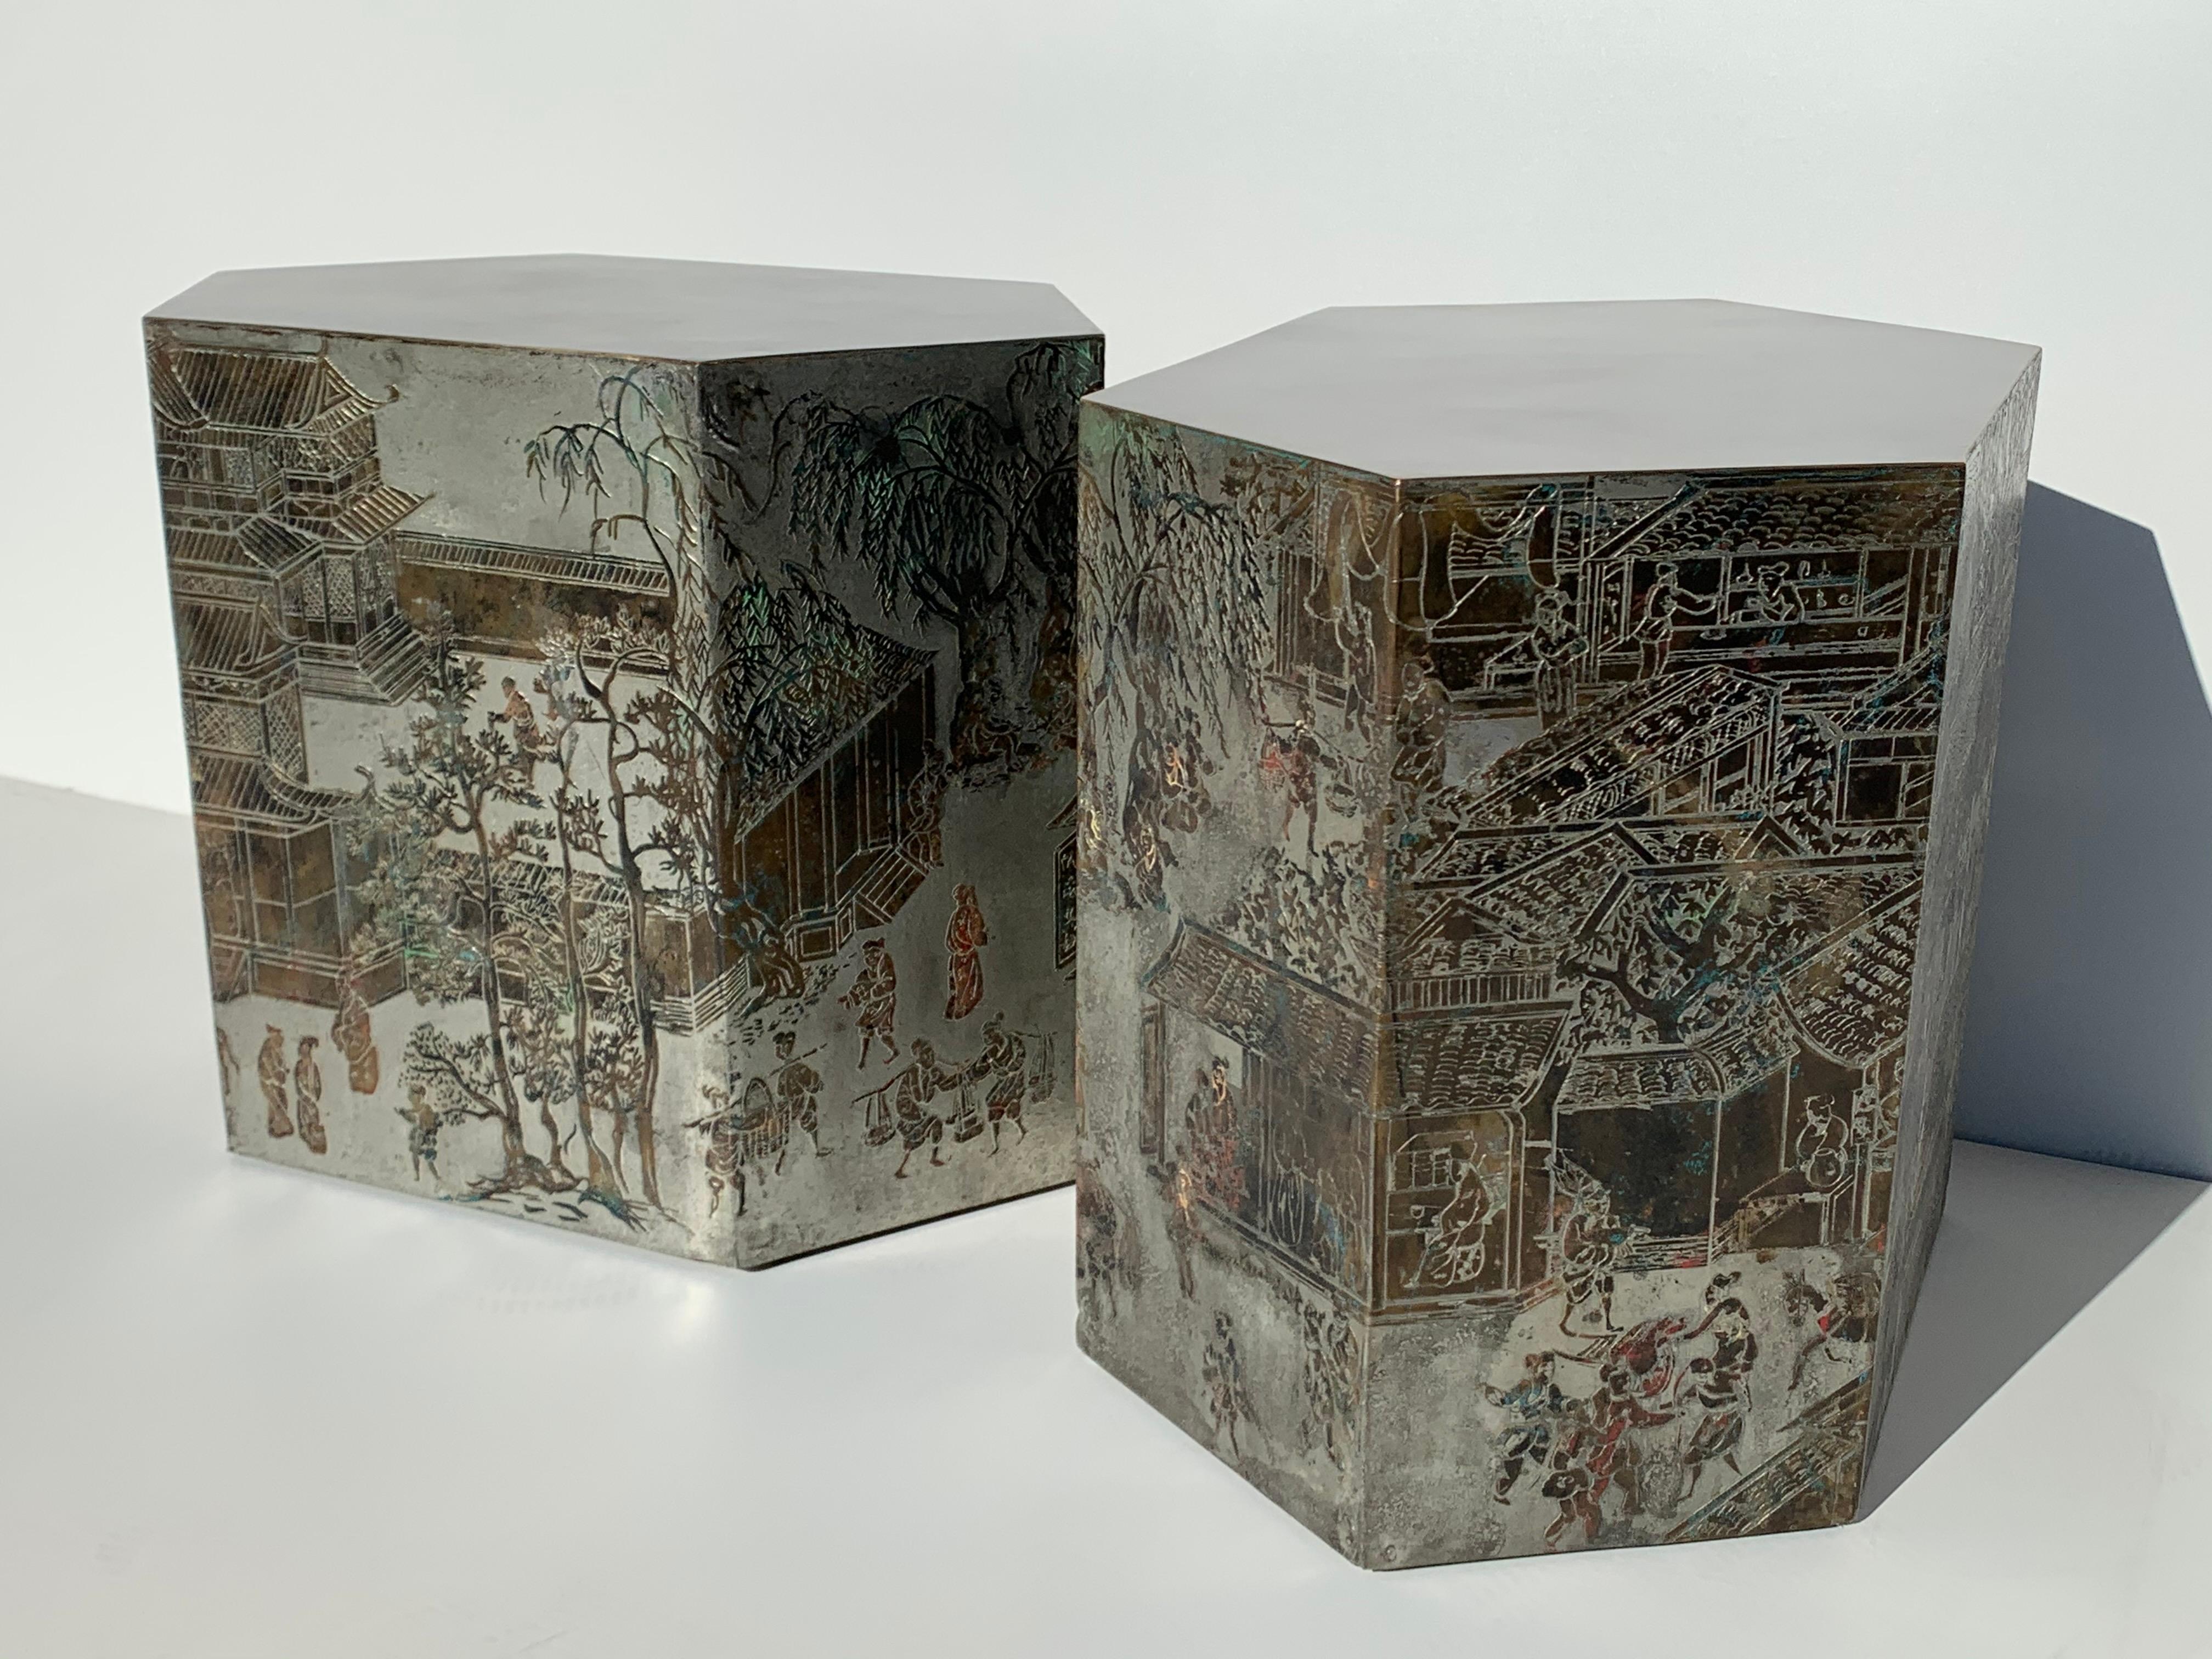 Etched Pair of LaVerne Chan End Tables